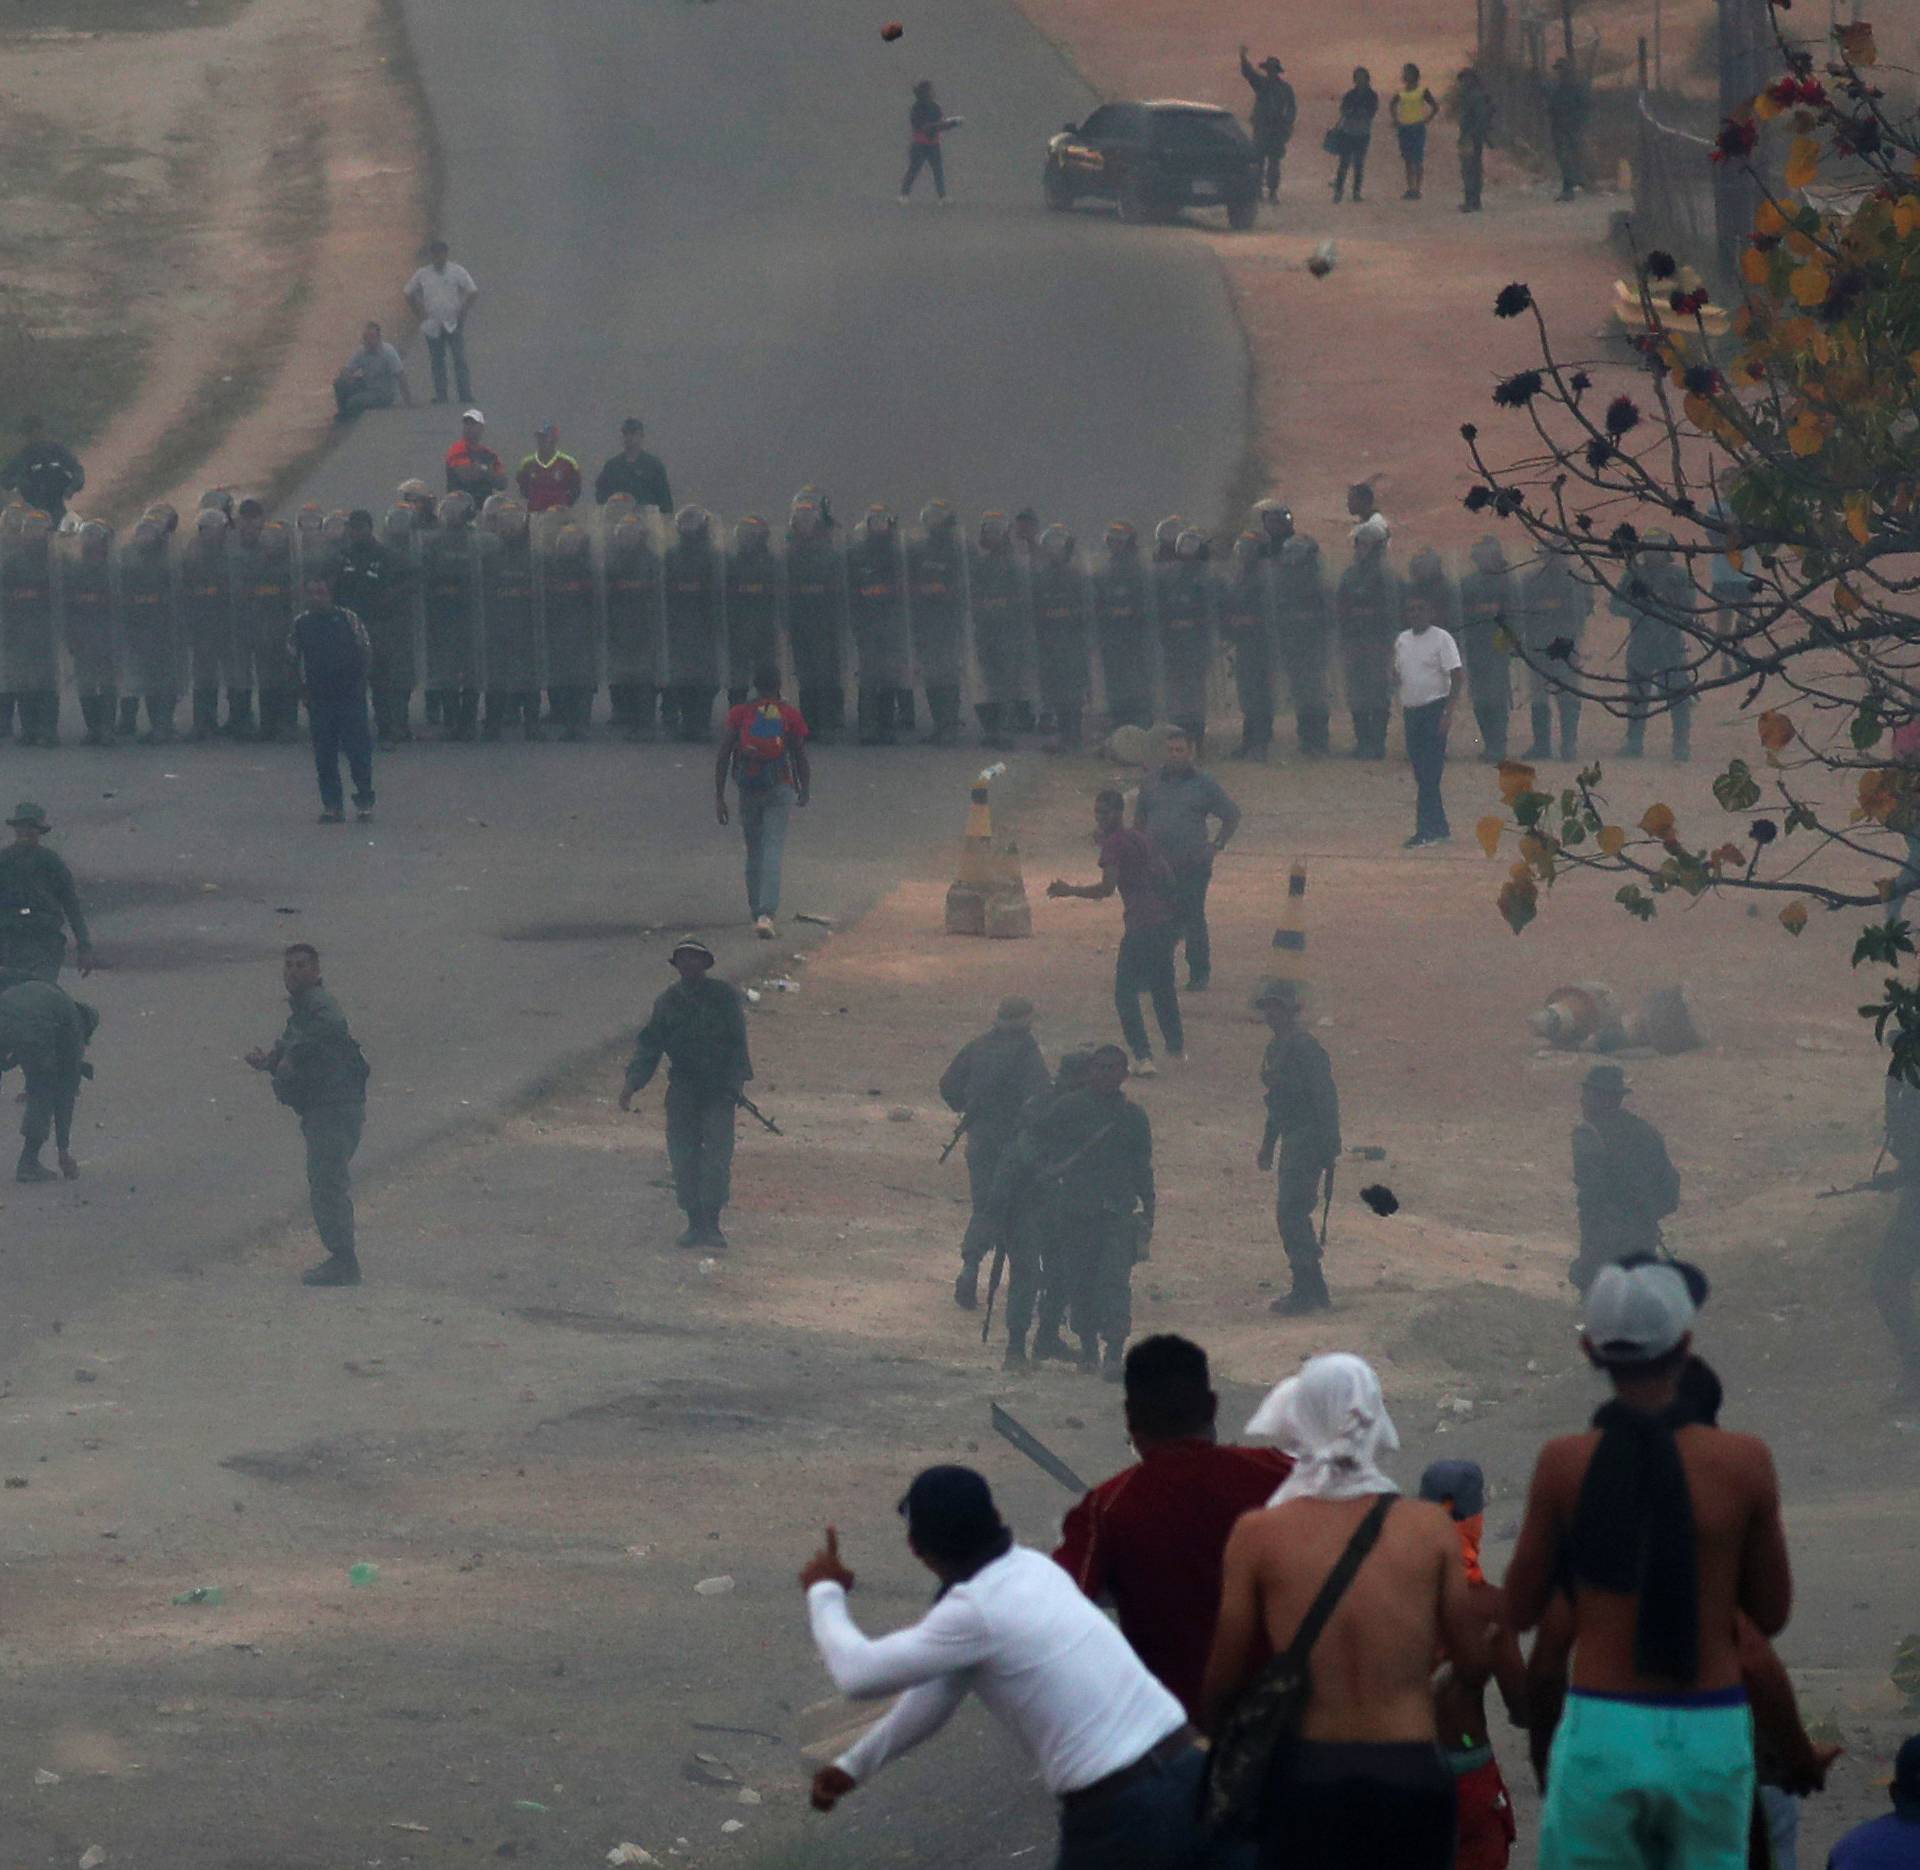 People look on during clashes with Venezuelan soldiers along the border between Venezuela and Brazil in Pacaraima